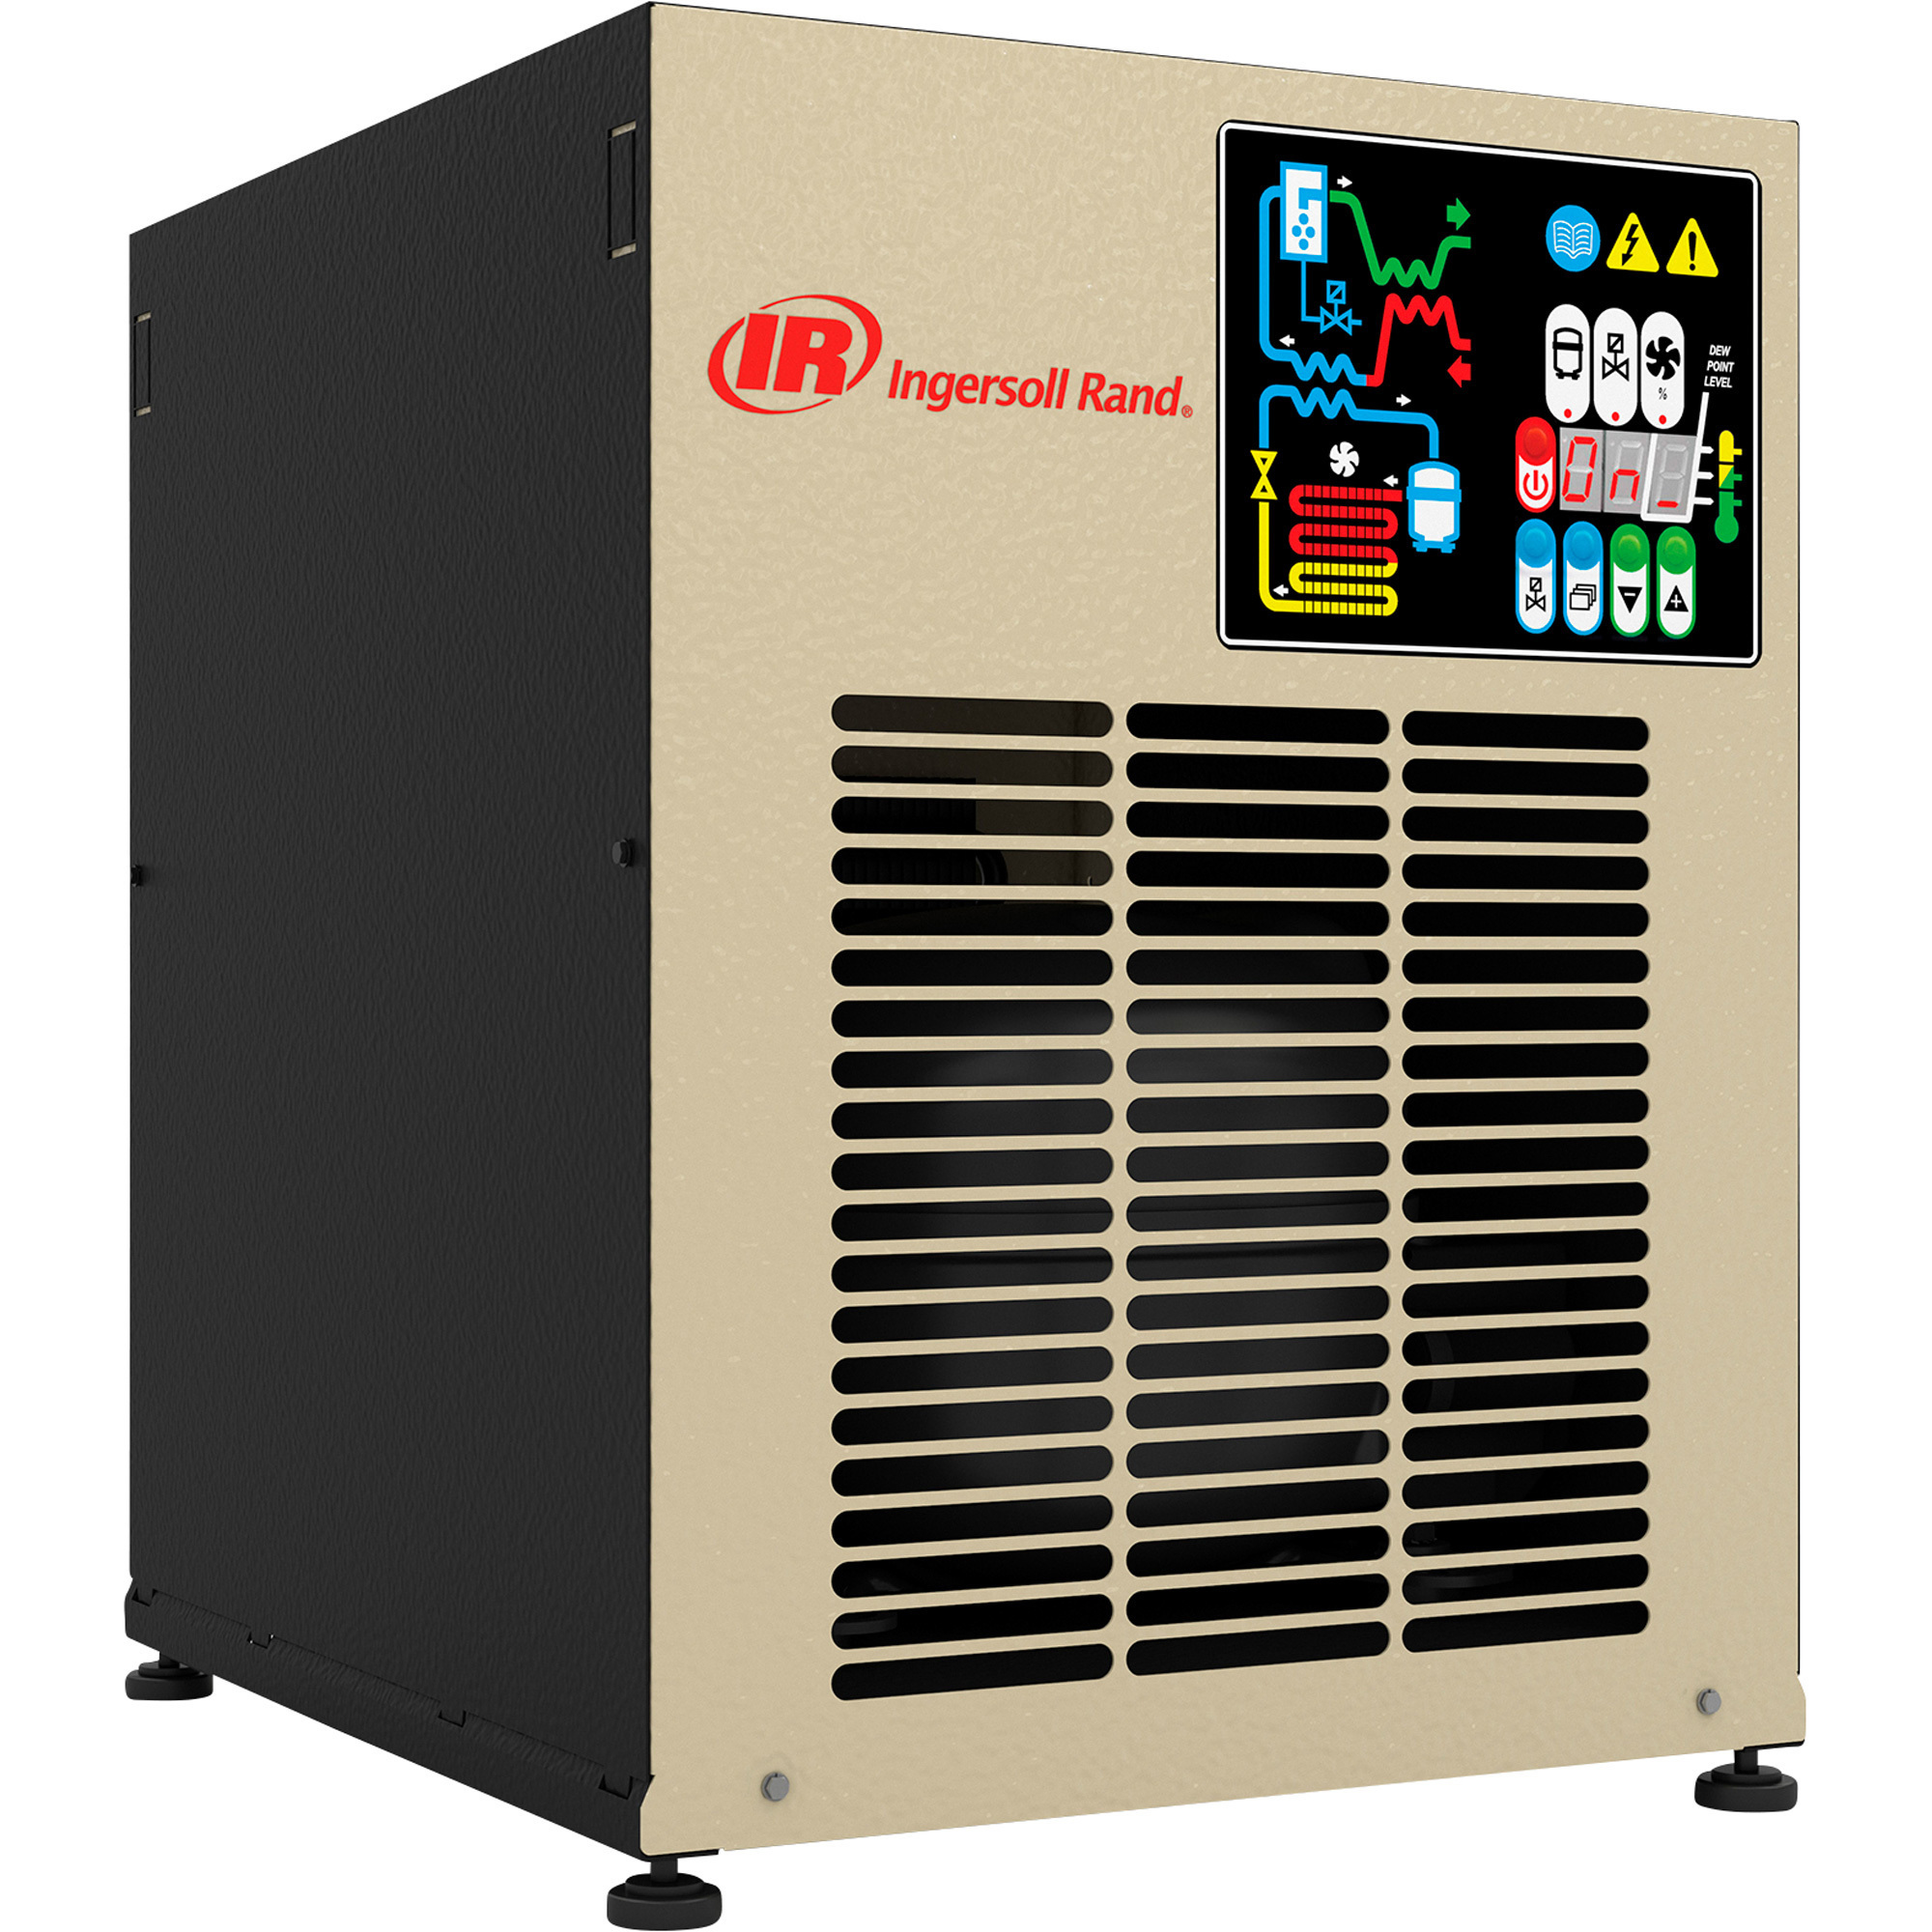 Ingersoll Rand Non-Cycling Refrigerated Air Dryer, 7 CFM, Model D12IN